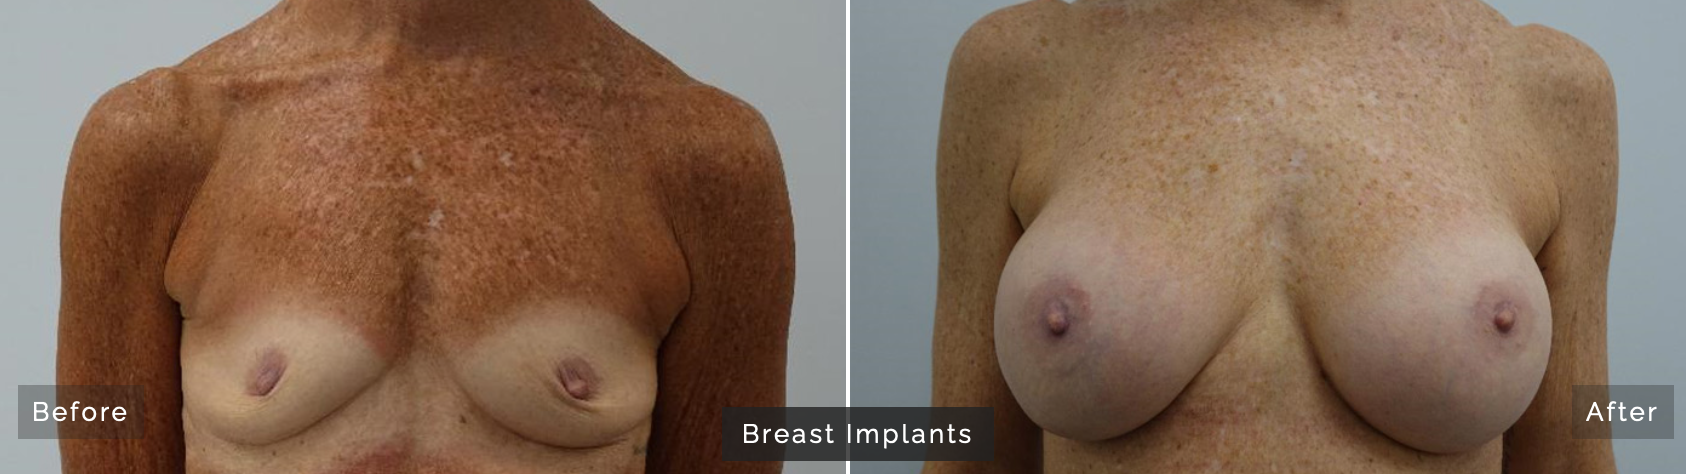 Breast augmentation with implants can elevate your breasts several cup sizes with a beautiful, natural-looking result. Here's a patient example from our Oakville clinic.